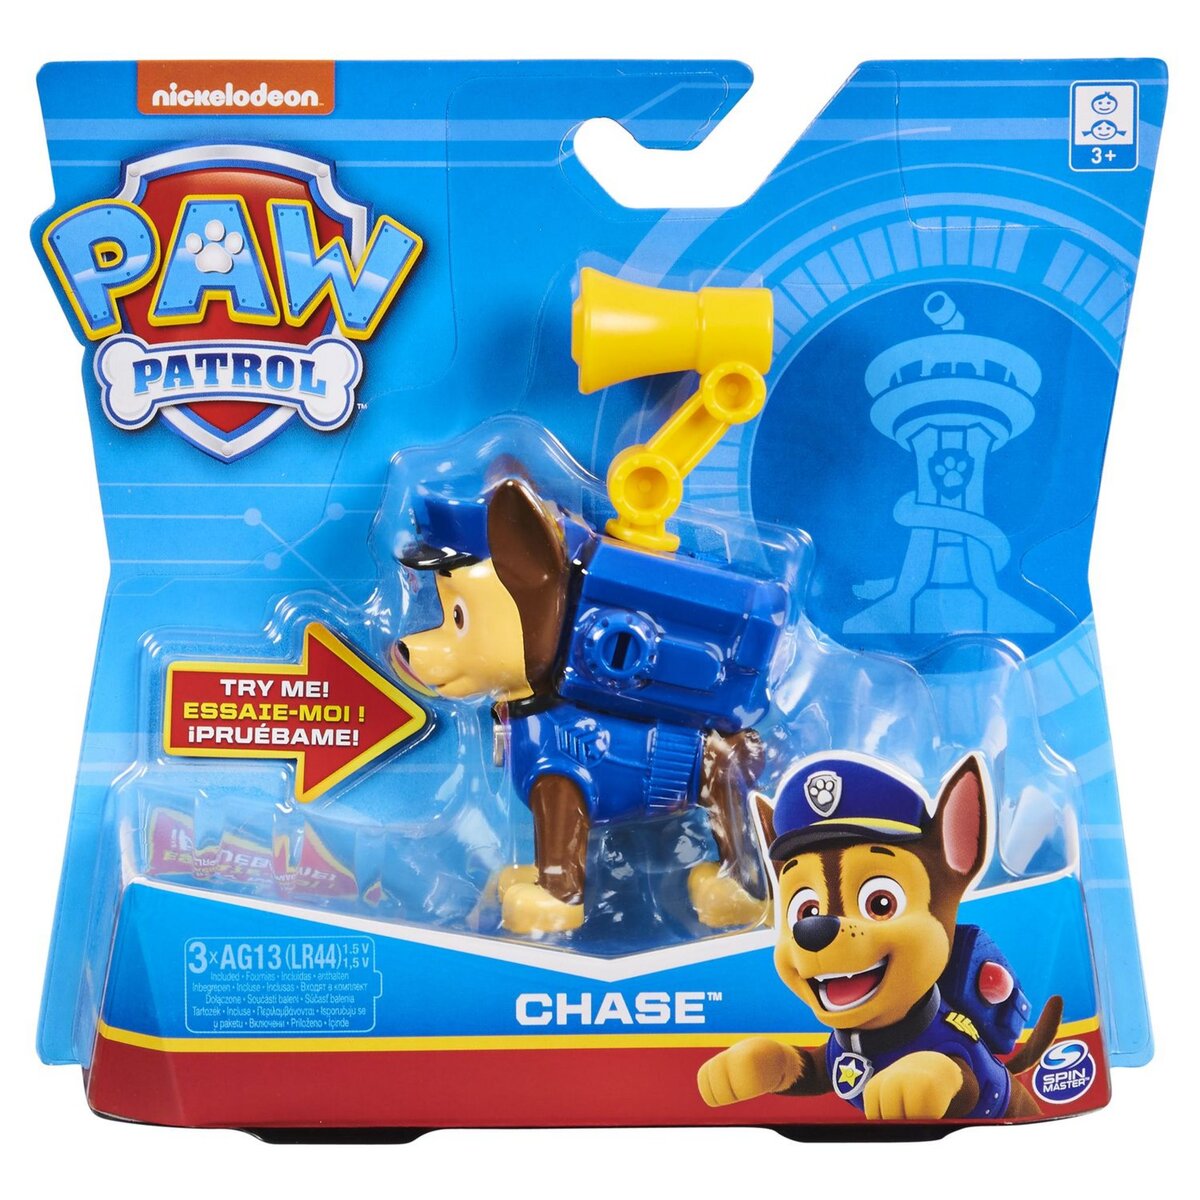 SPIN MASTER Figurine d'action - Pat Patrouille